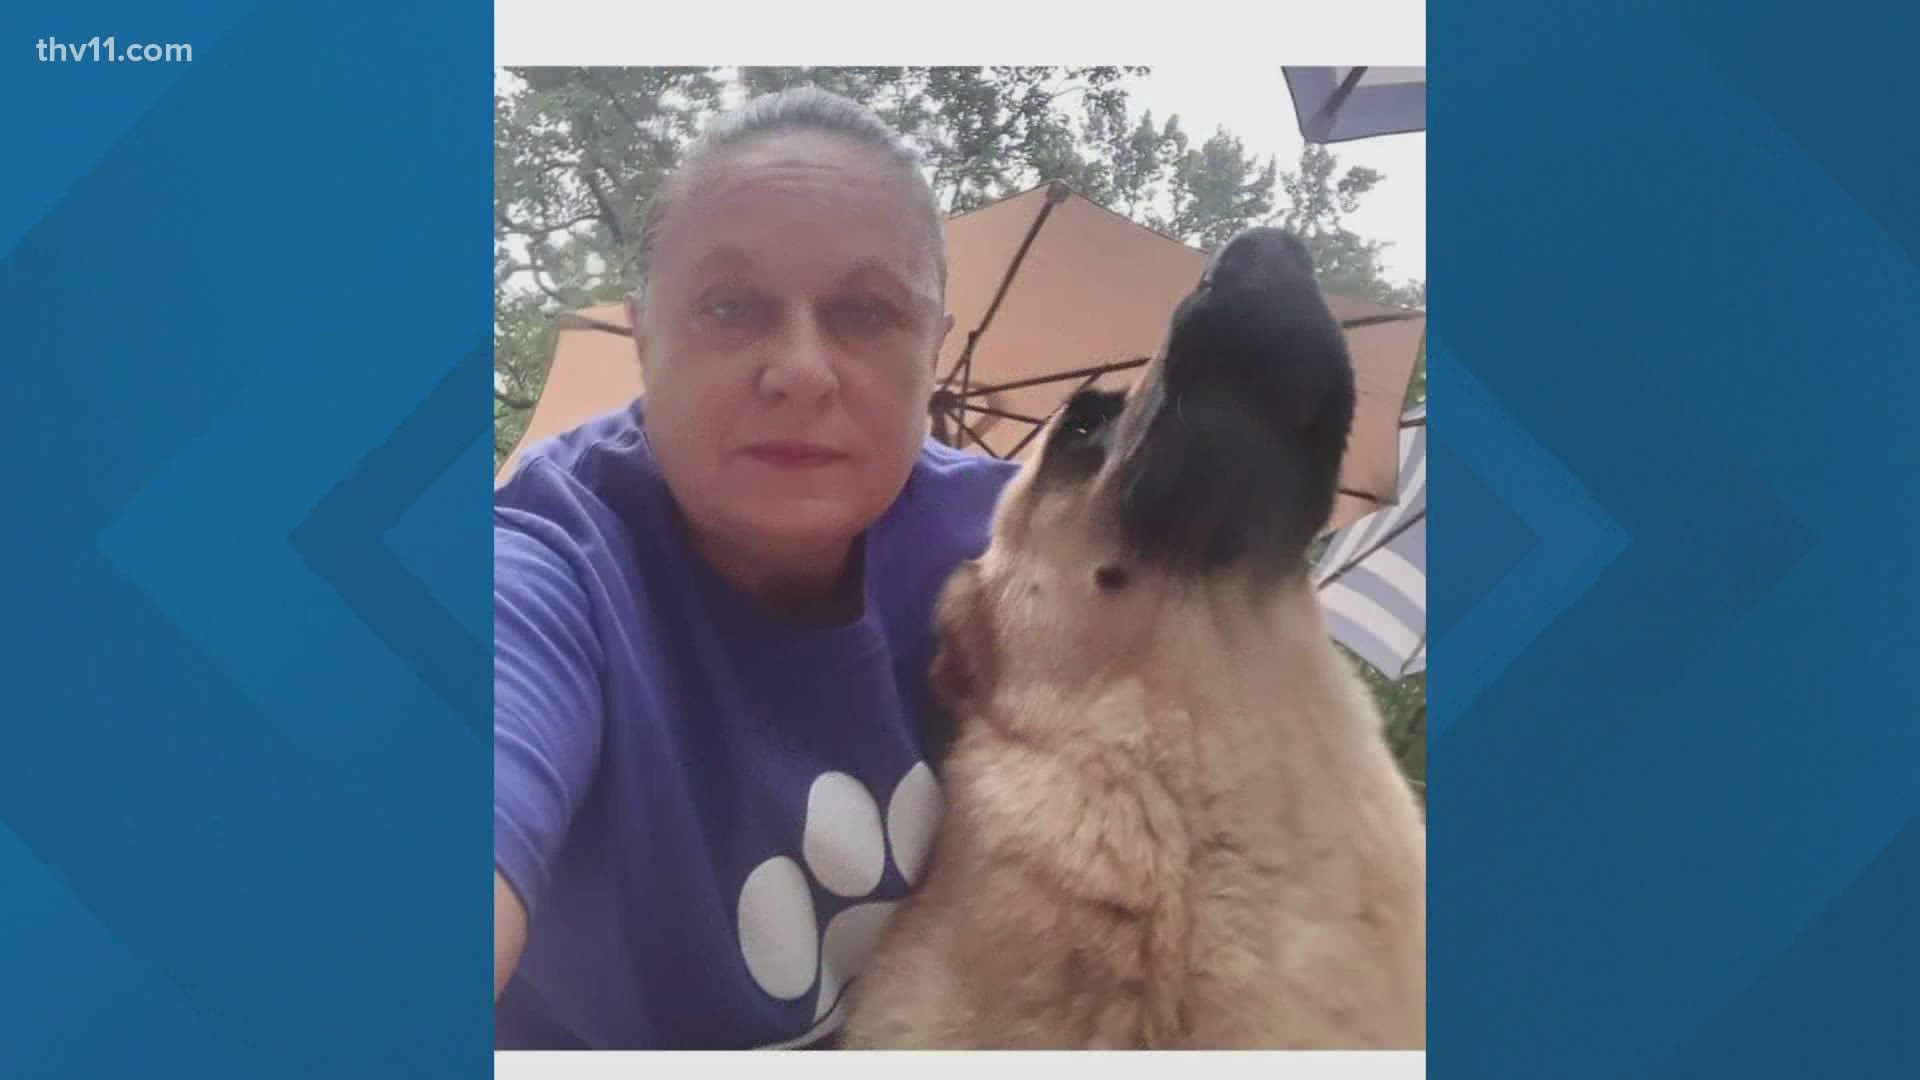 For three years, Debbie Pruitt has been trying to befriend a dog named Champ.